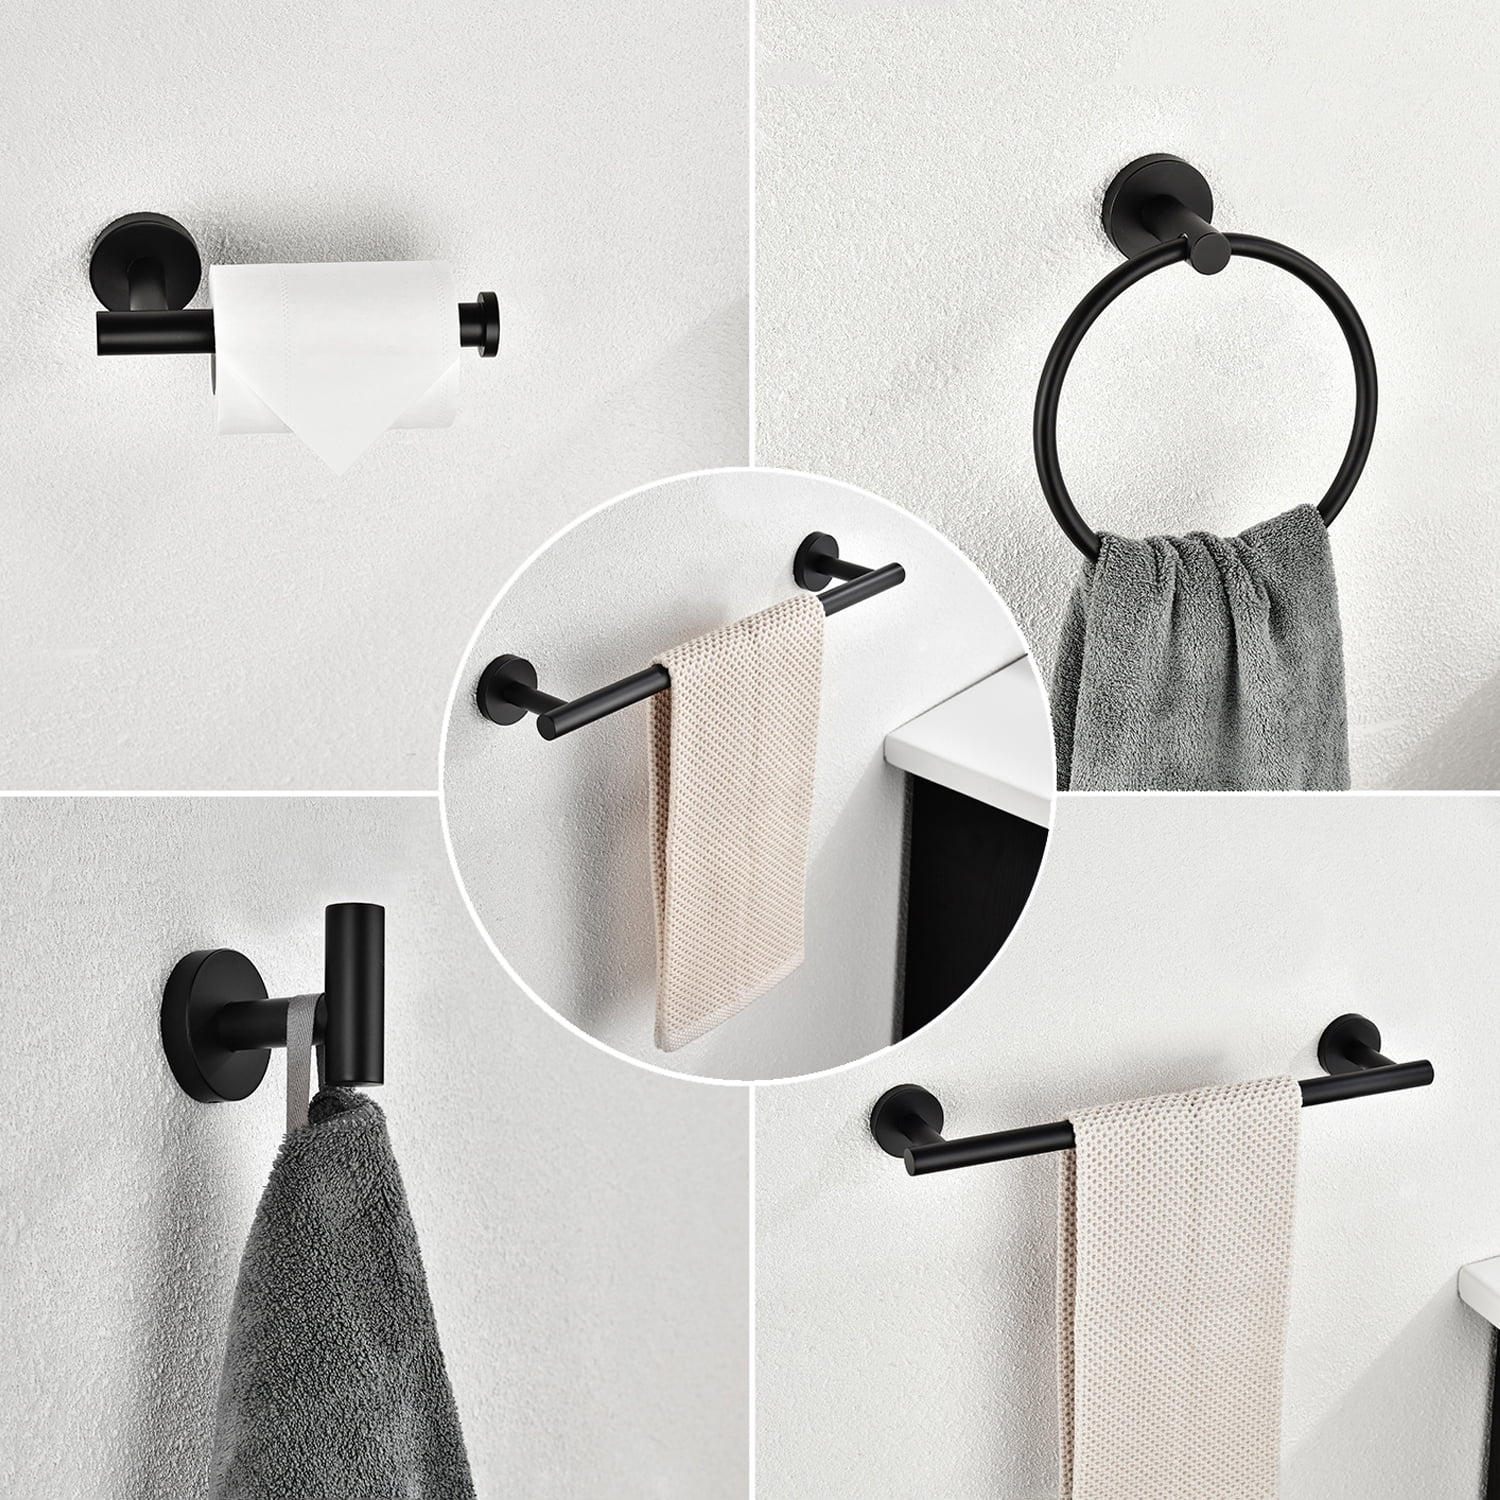 Details about  / Toilet Paper Holder Towel Rack Black Stainless Steel For Bathroom Accessories